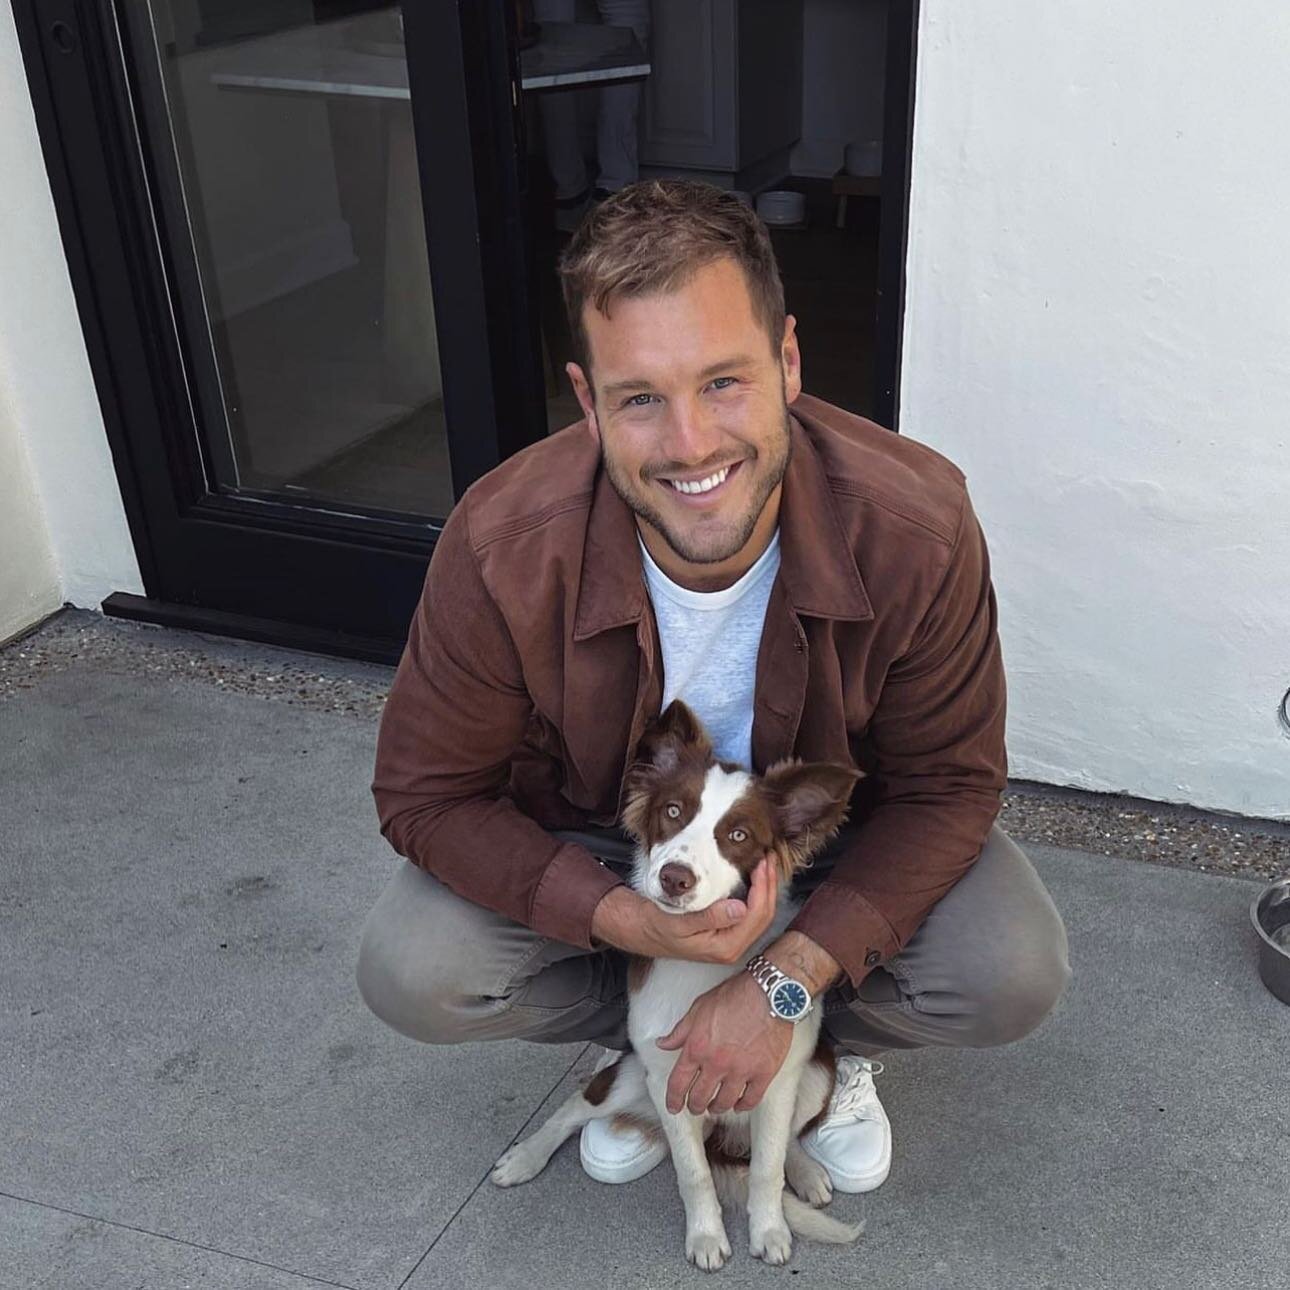 Congrats to bachelor alum @coltonunderwood and @jordancbrown_ 💒 🥂 💍 The devoted dog dads tied the knot this weekend in a beautiful outdoor ceremony in Napa 🍷 

📸: @coltonunderwood @jordancbrown_ @people 

#coltonunderwood #bachelornation #willyo